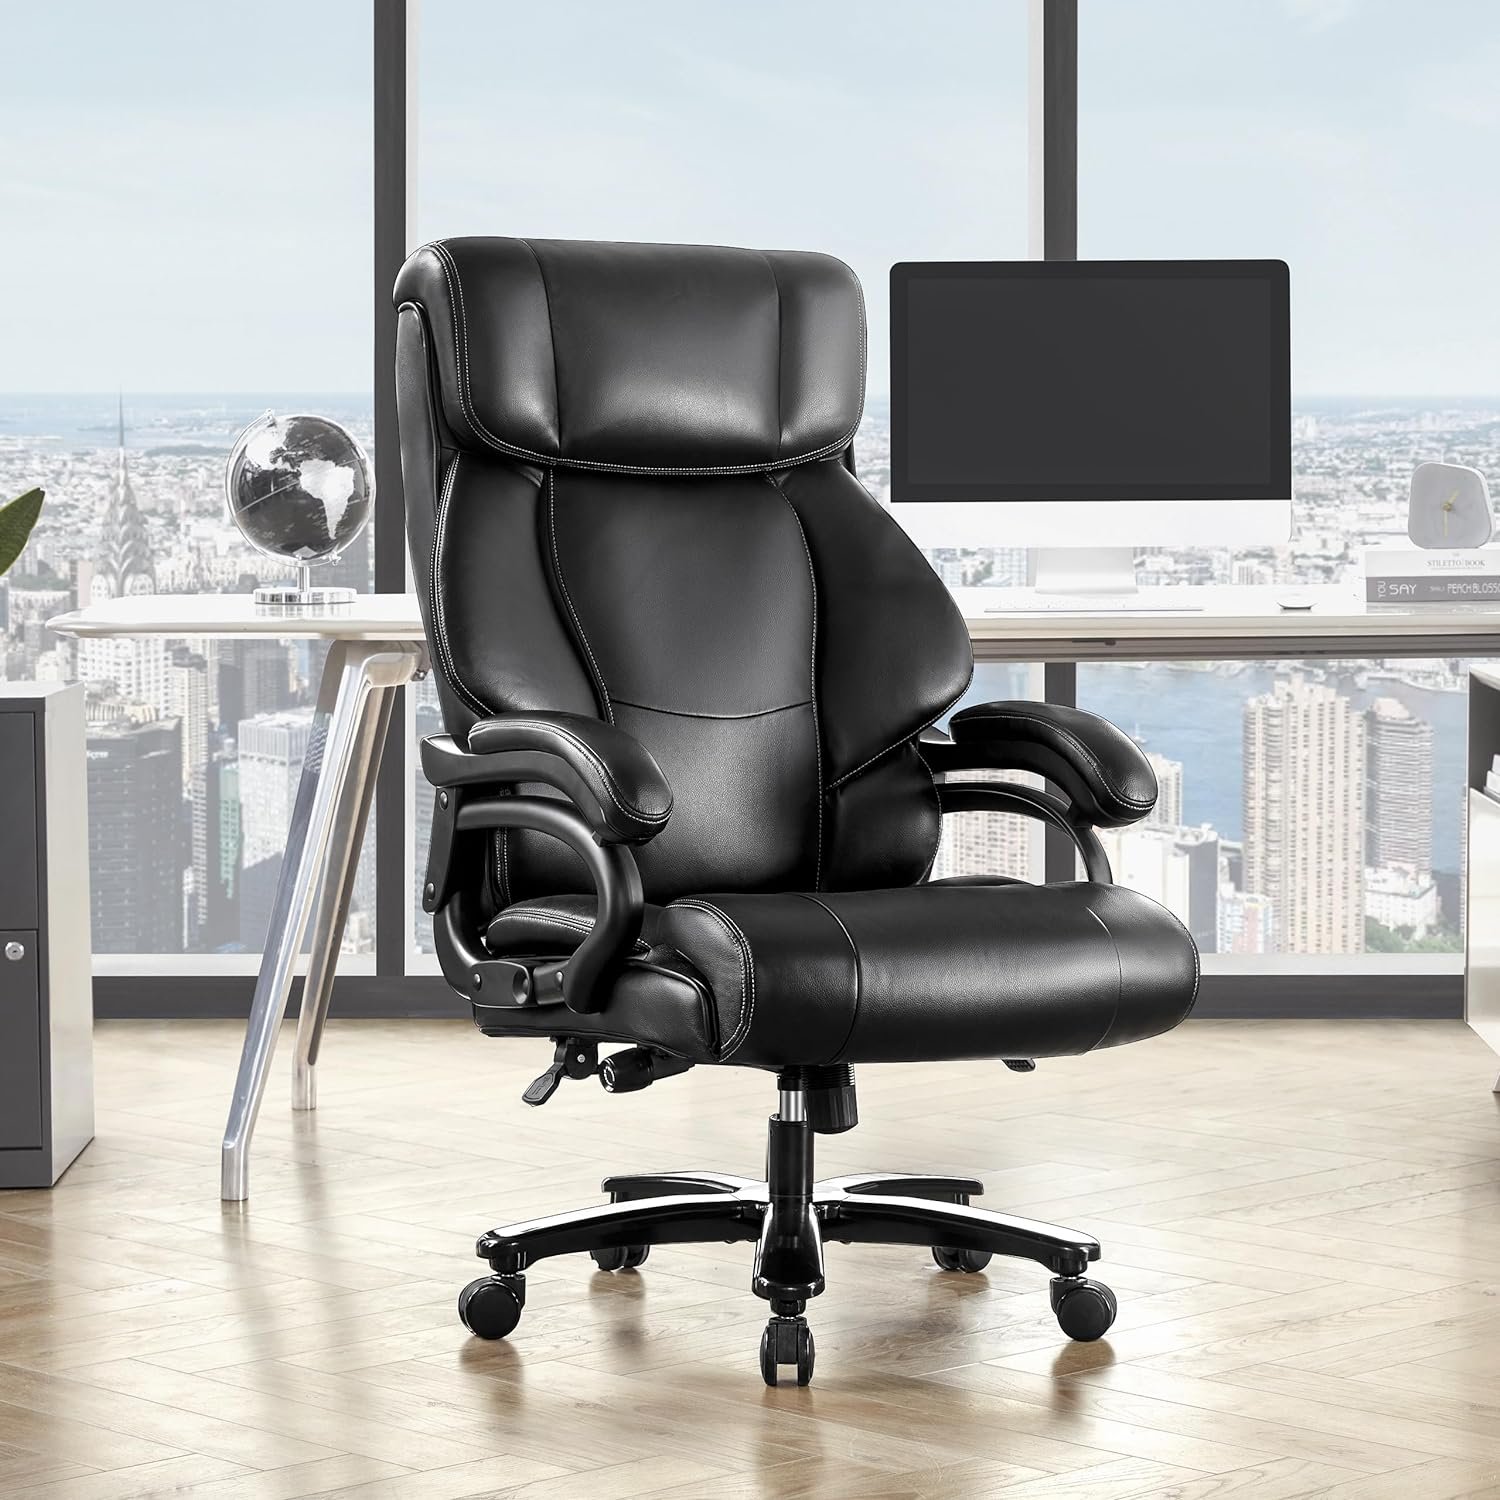 Weture Big and Tall Office Chair Review